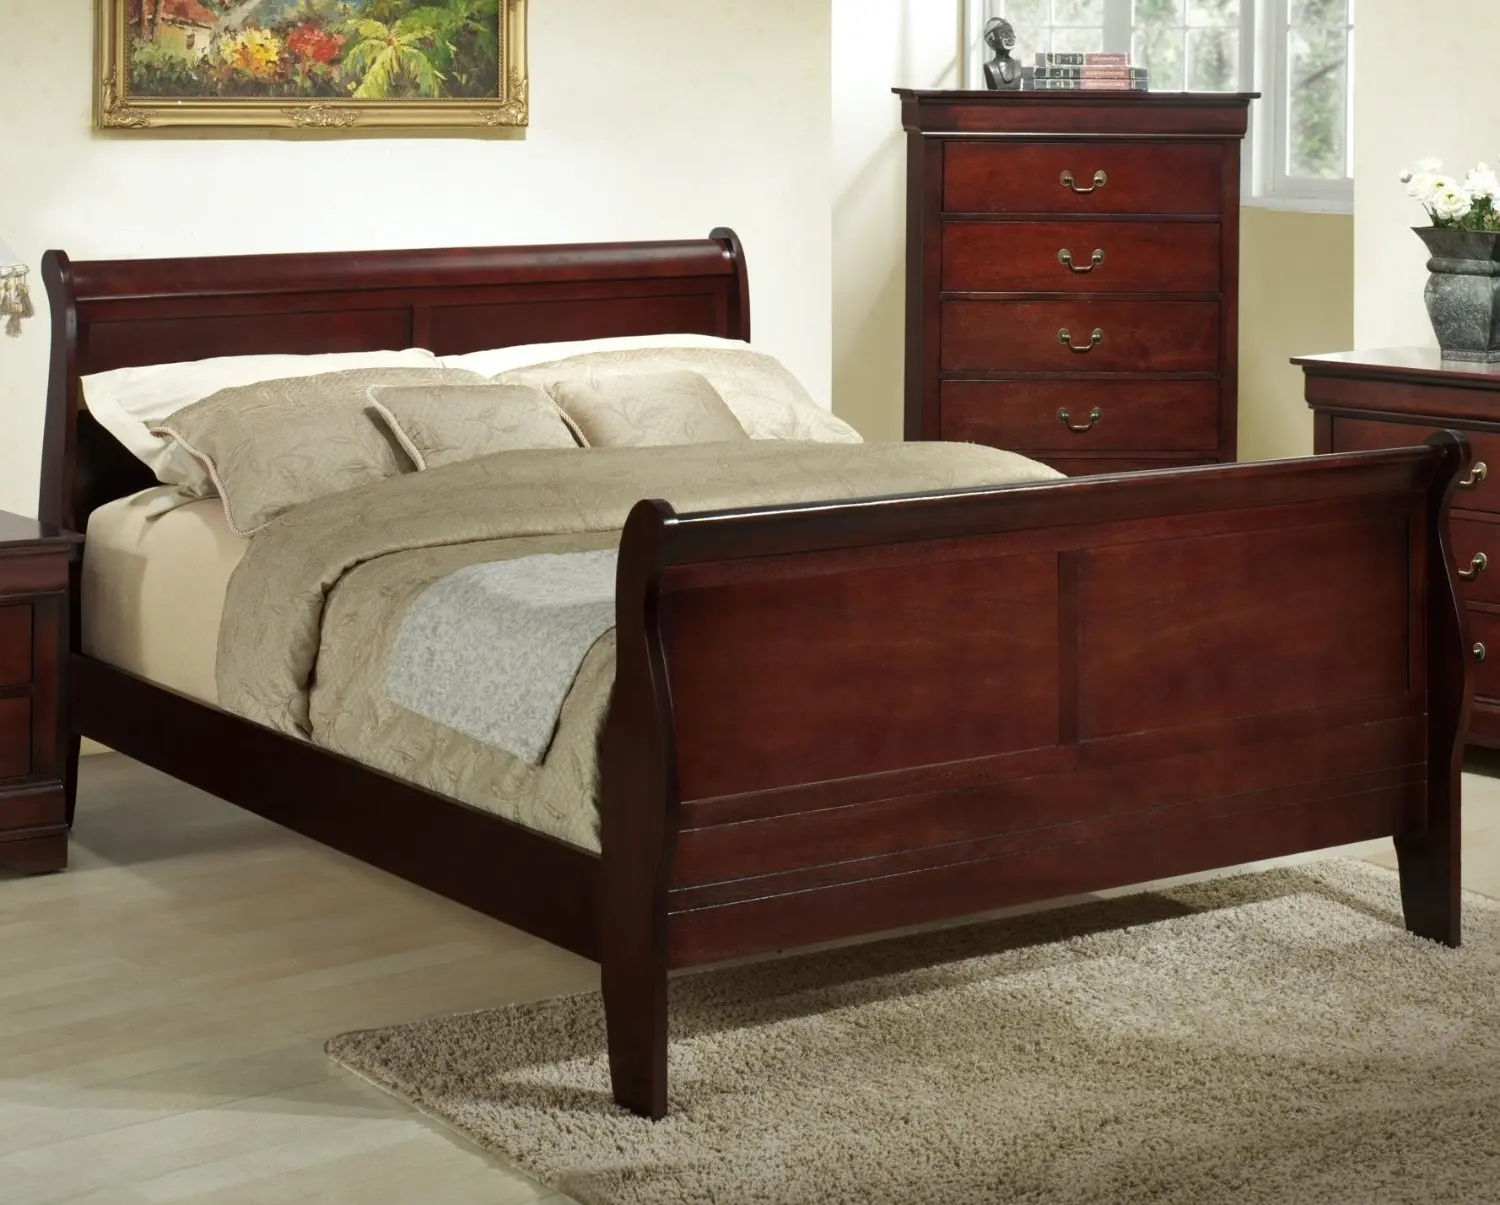 Buy Roundhill Furniture Isola Louis Philippe Style Wood Sleigh Bed, Queen, Cherry Finish in ...